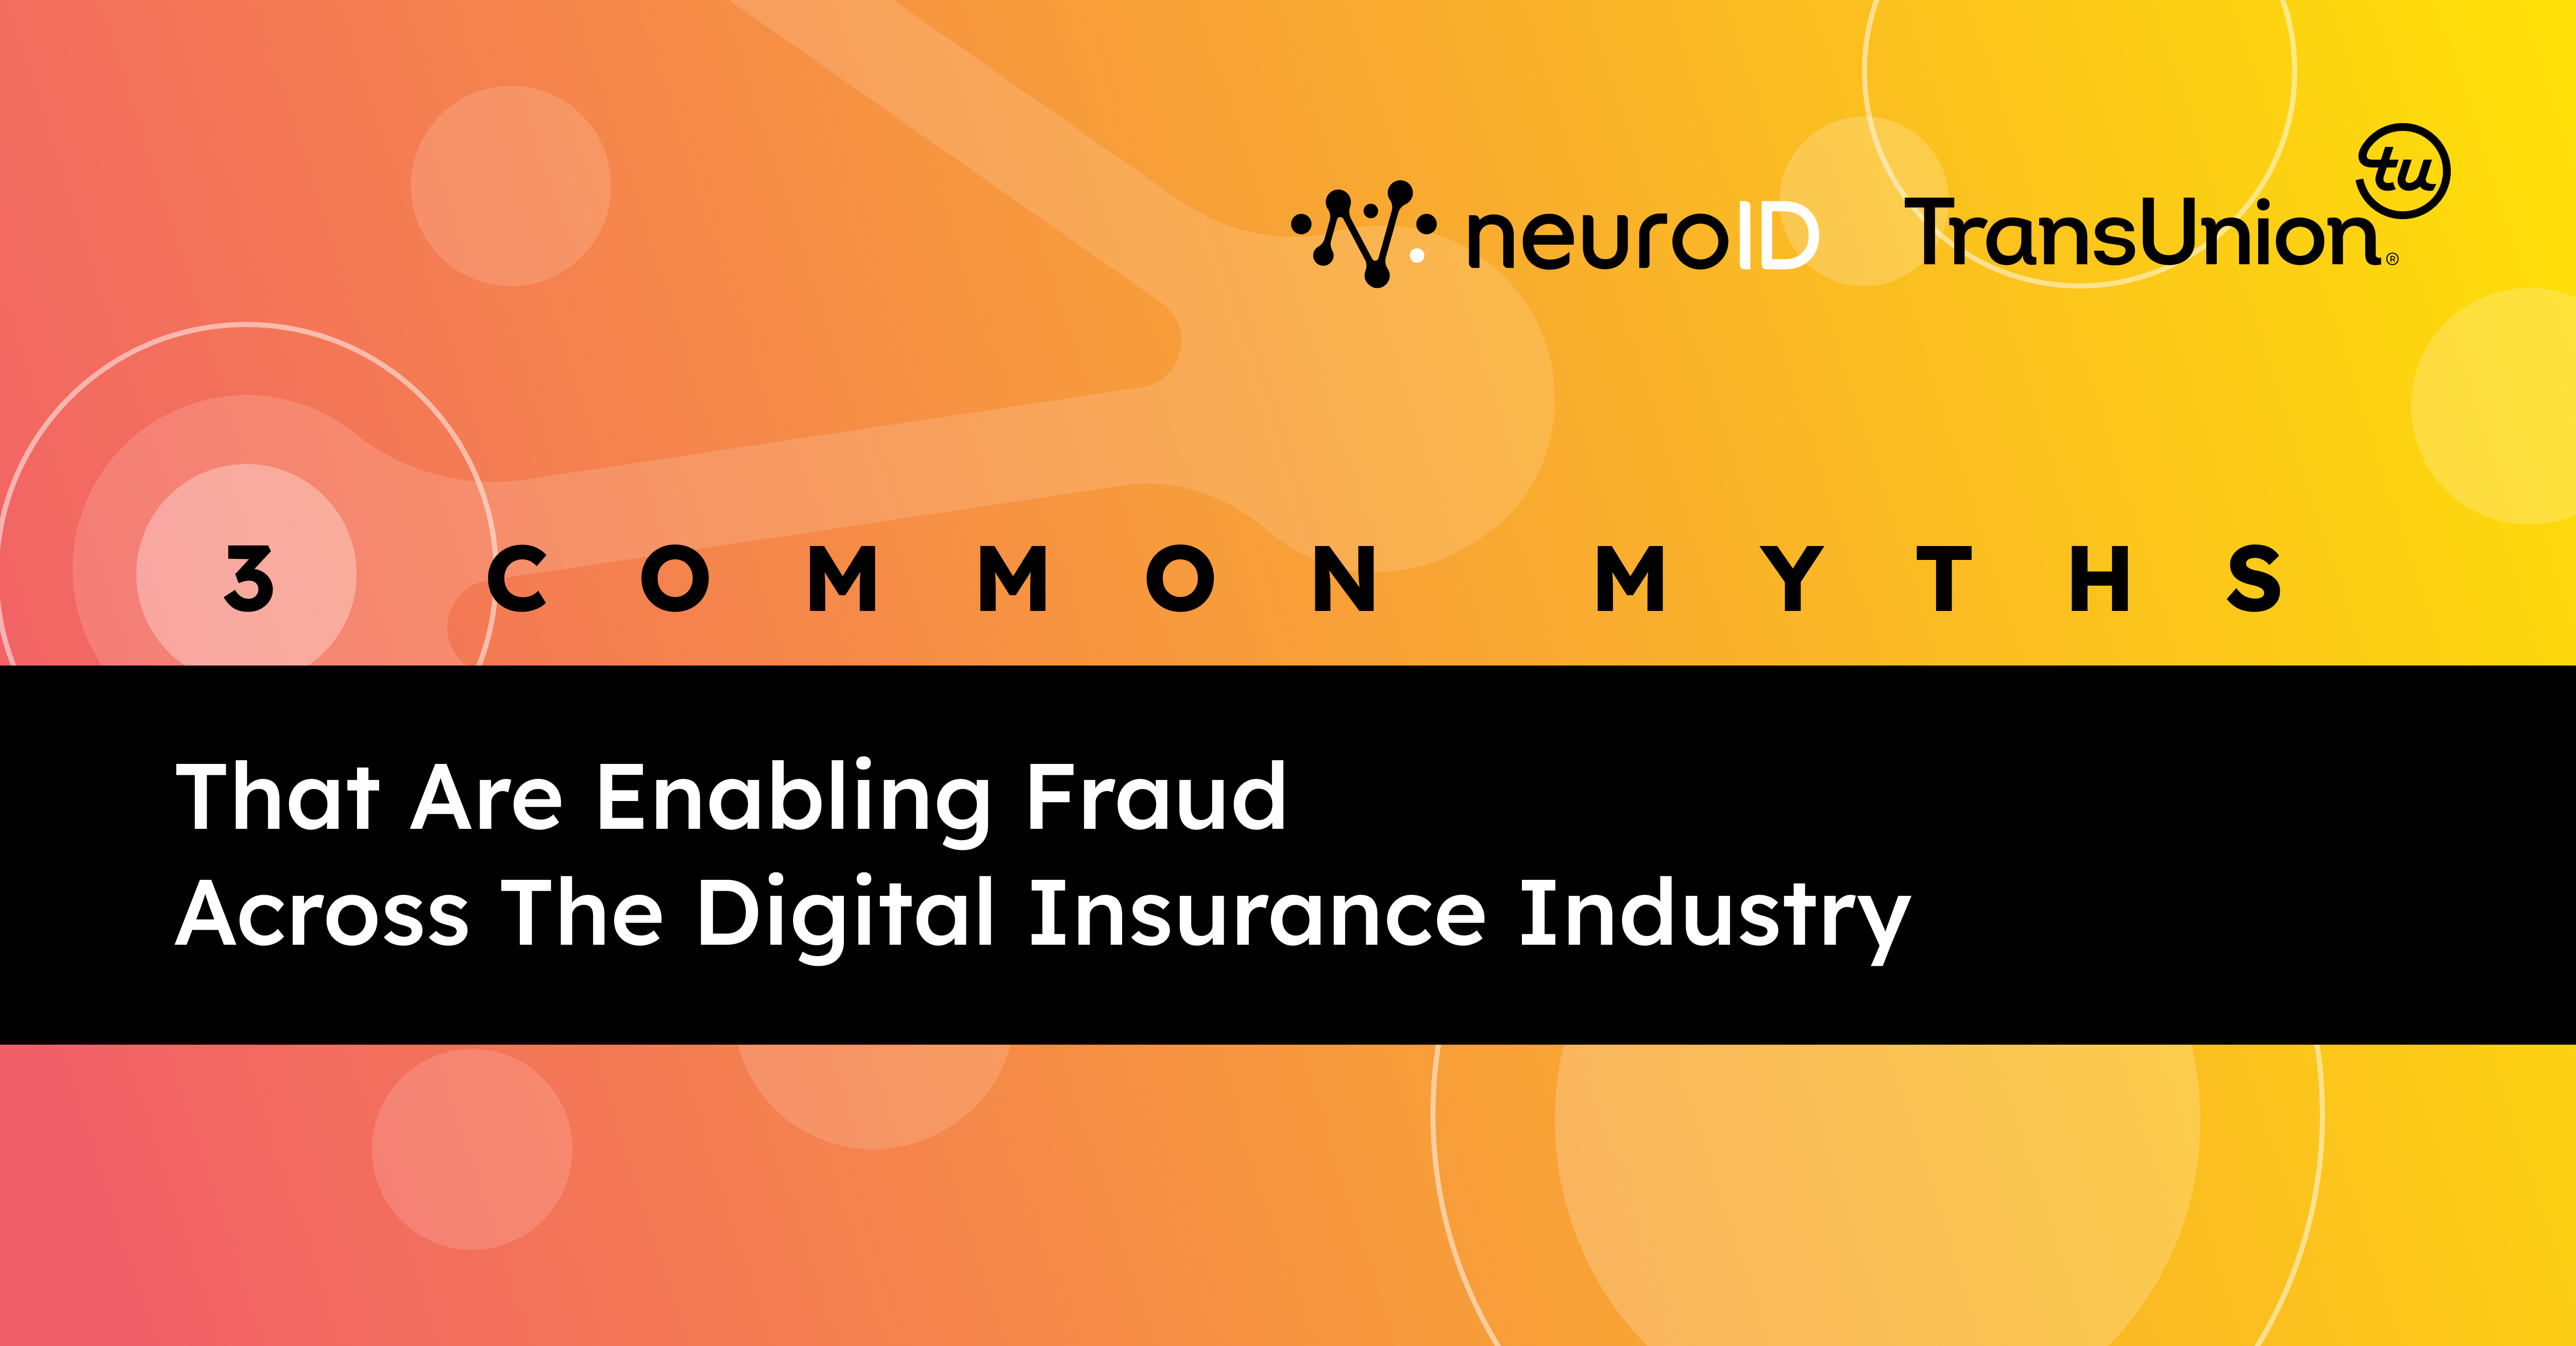 3 Common Myths that Are Enabling Fraud Across the Digital Insurance Industry